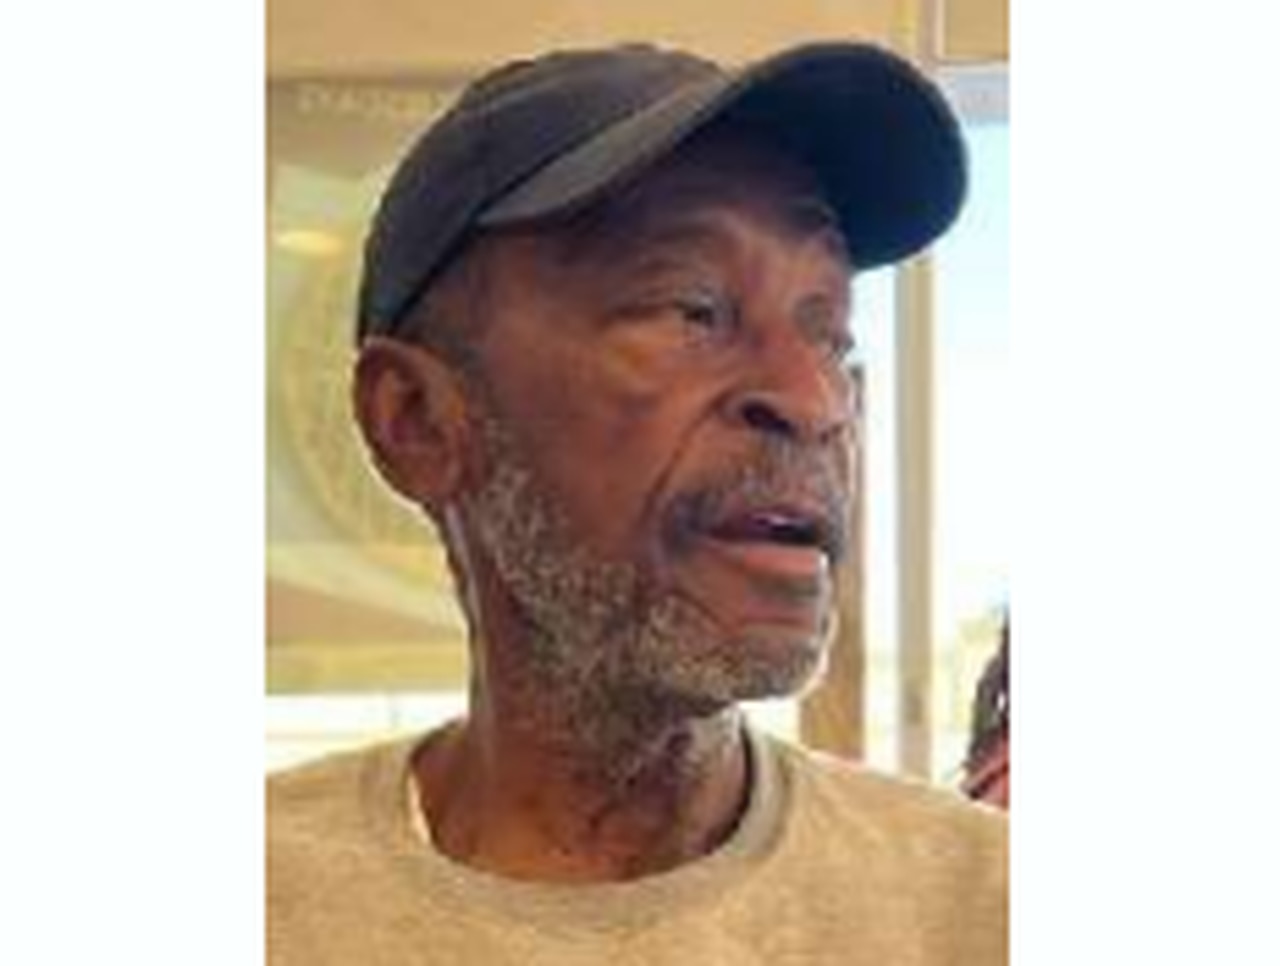 Alert issued for 75-year-old man missing in north Alabama